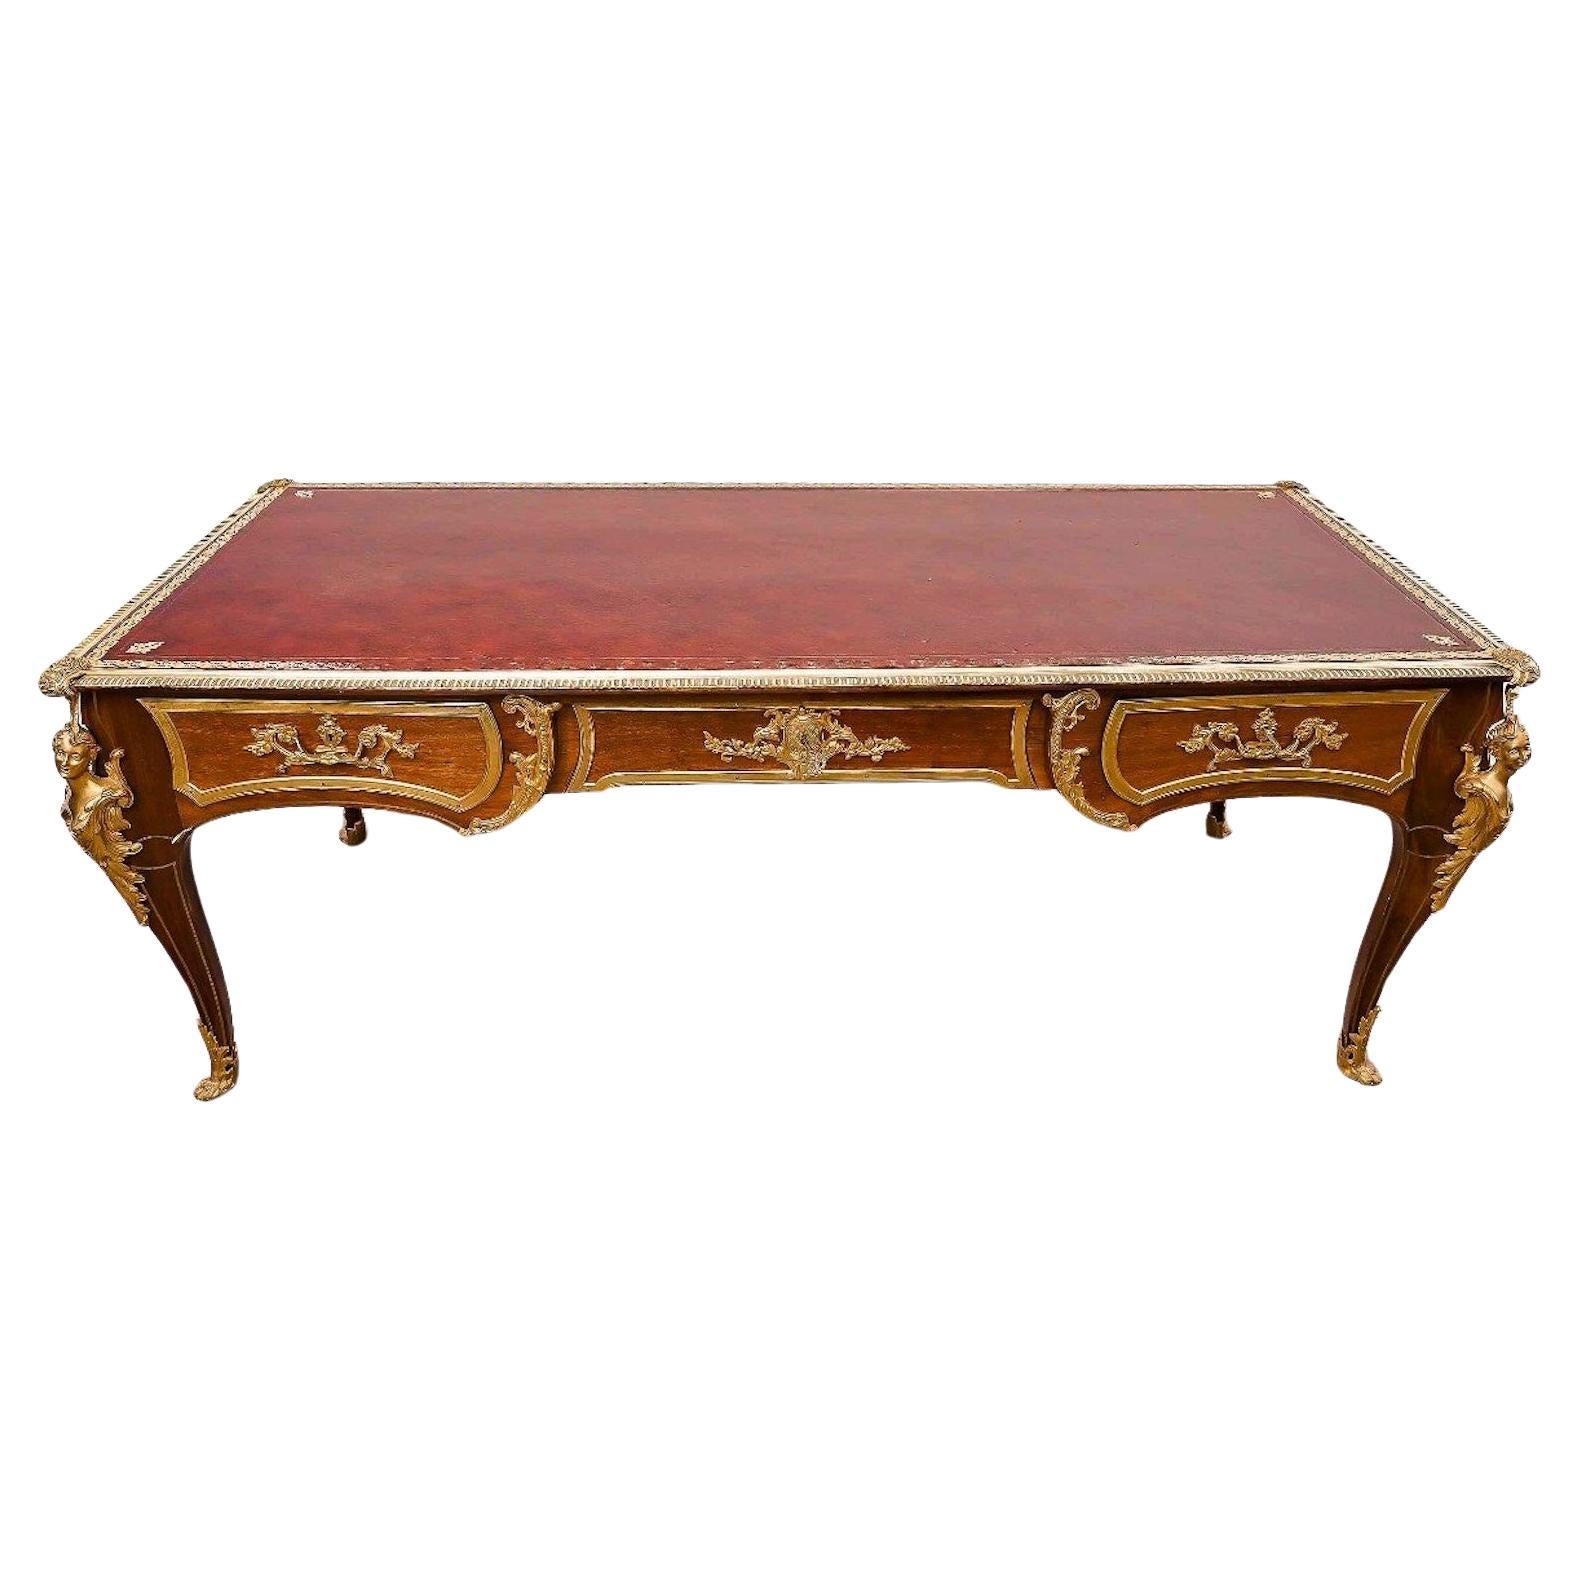 Minister's Desk, Regence Style, Late 19th Century or Early 20th Century. For Sale